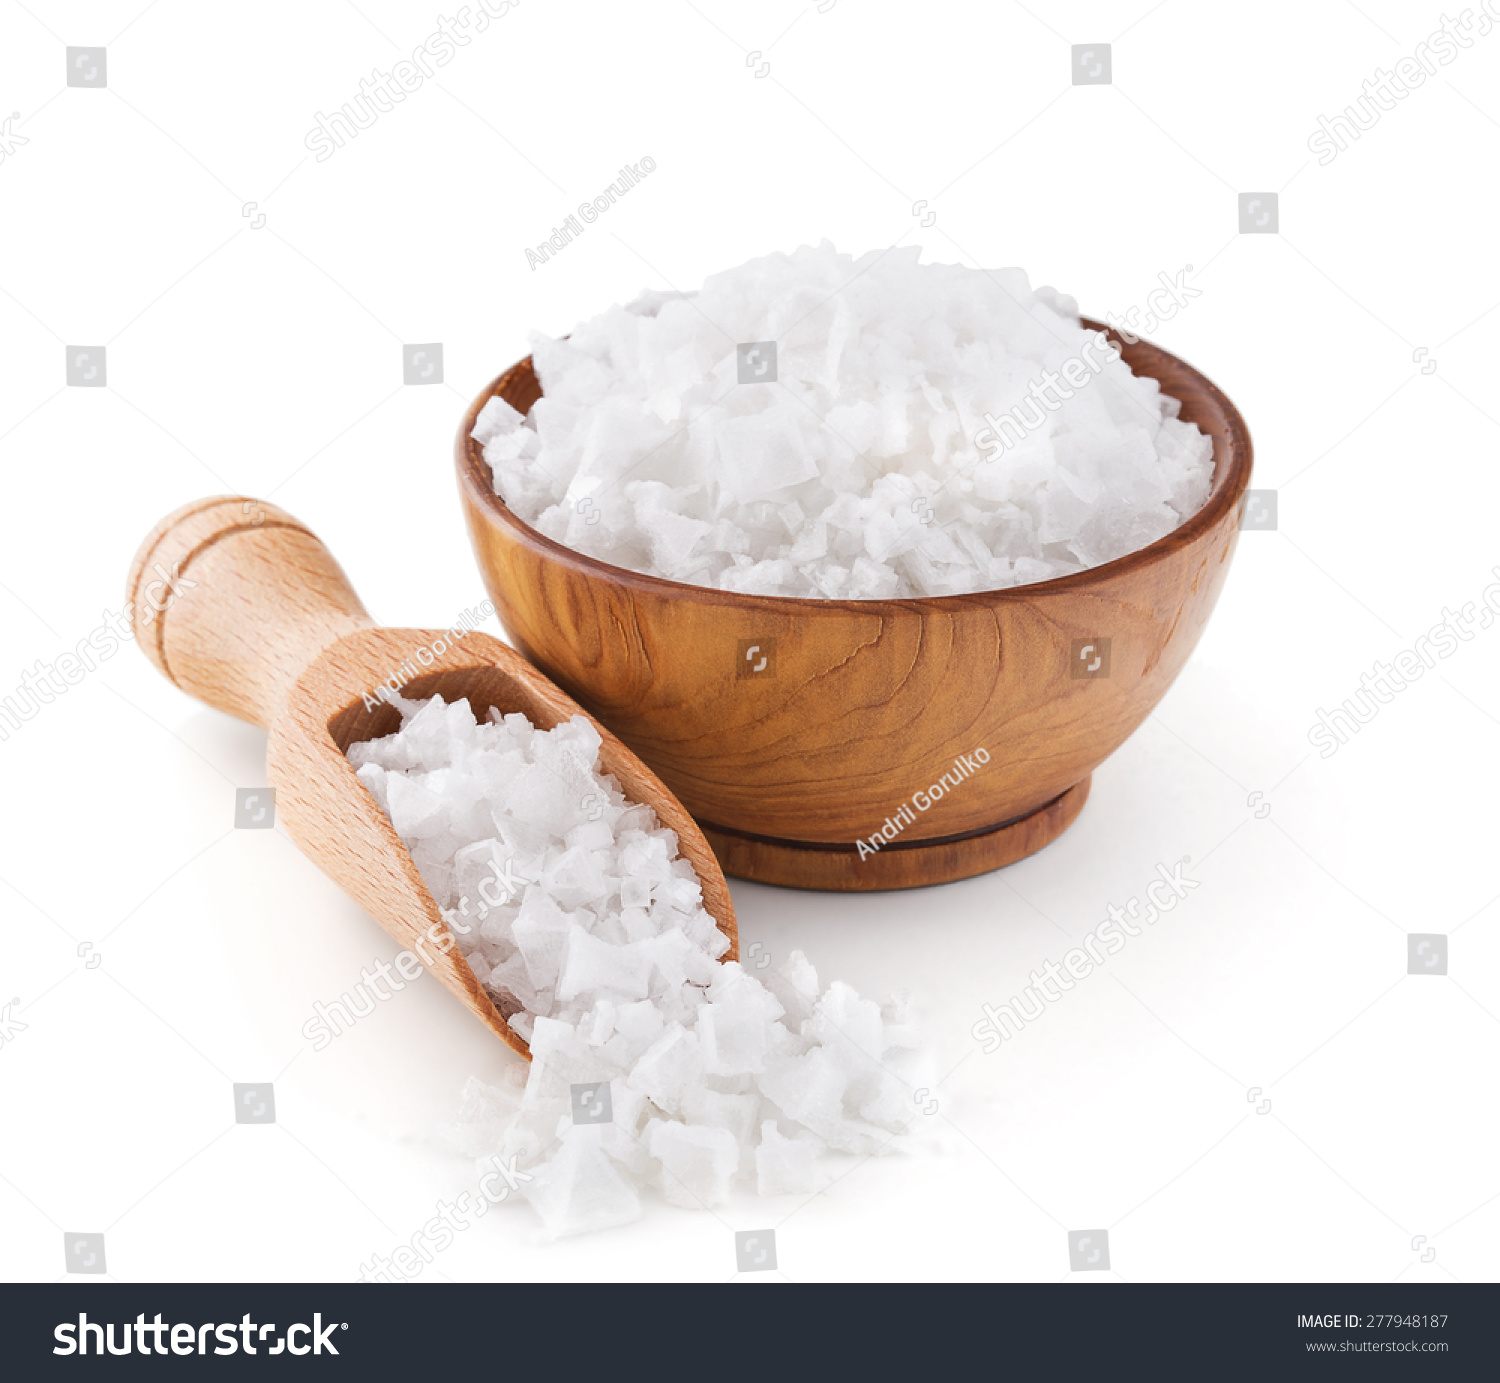 Cyprus sea salt flakes in a wooden bowl isolated on white background #277948187